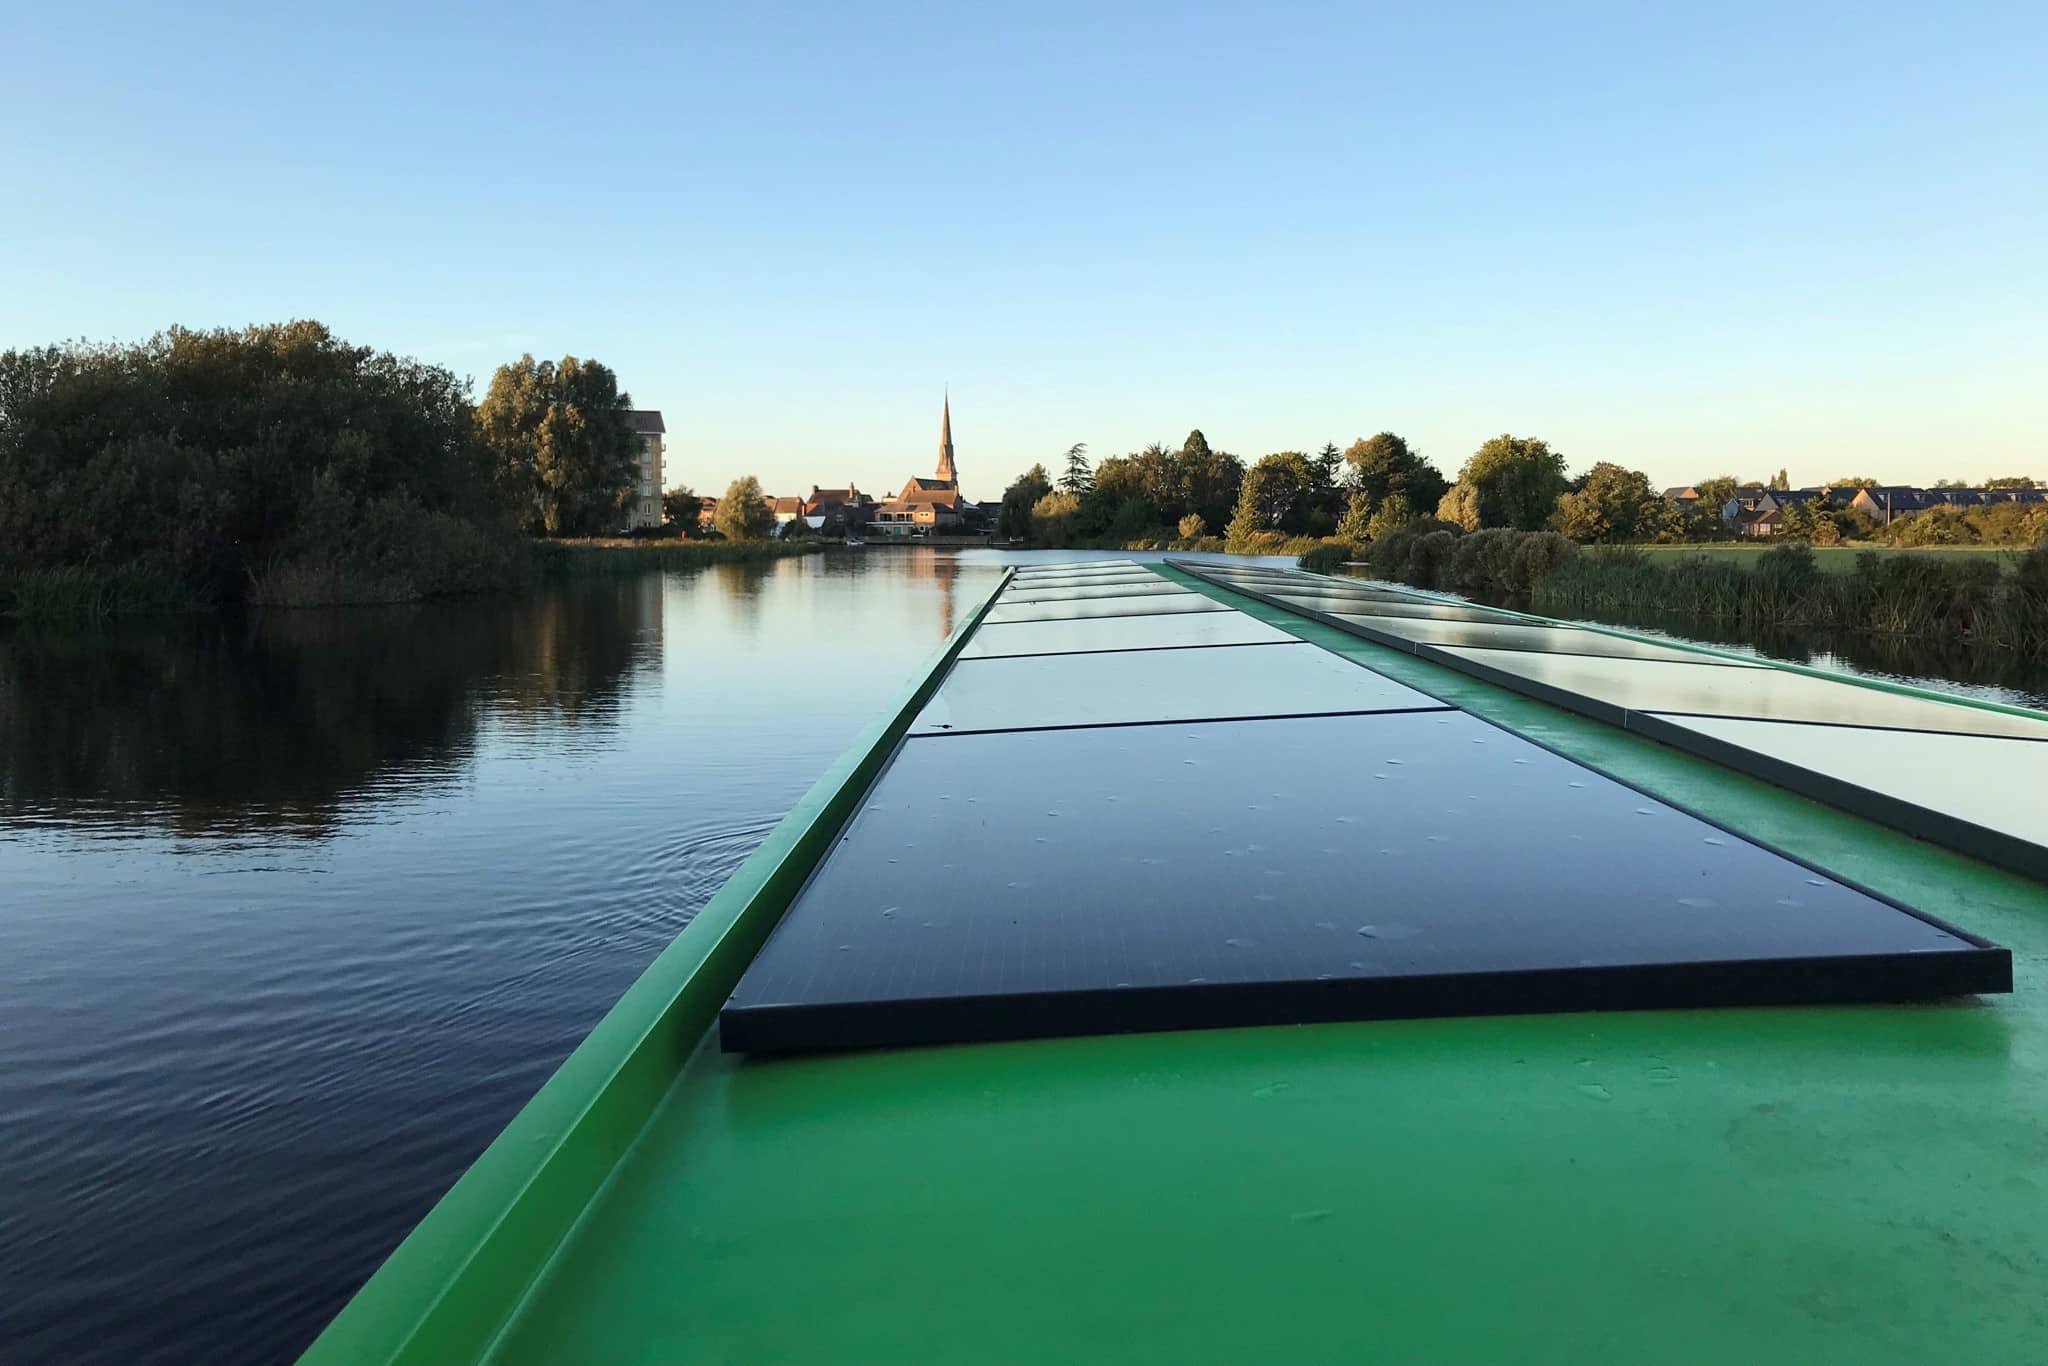 View across solar panels on River Great Ouse